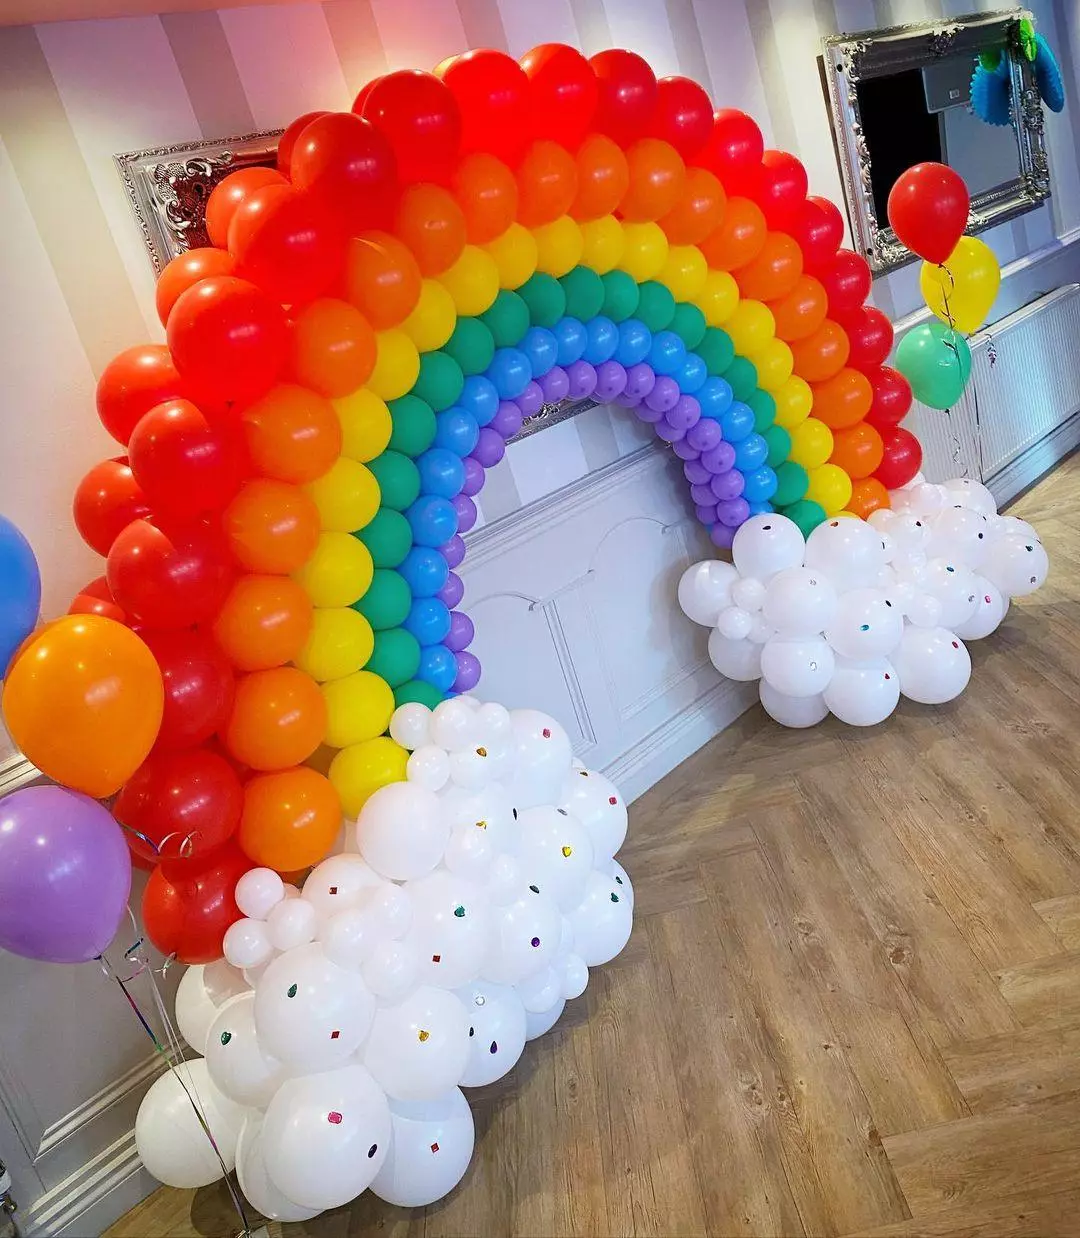 How to Make a Balloon Archway